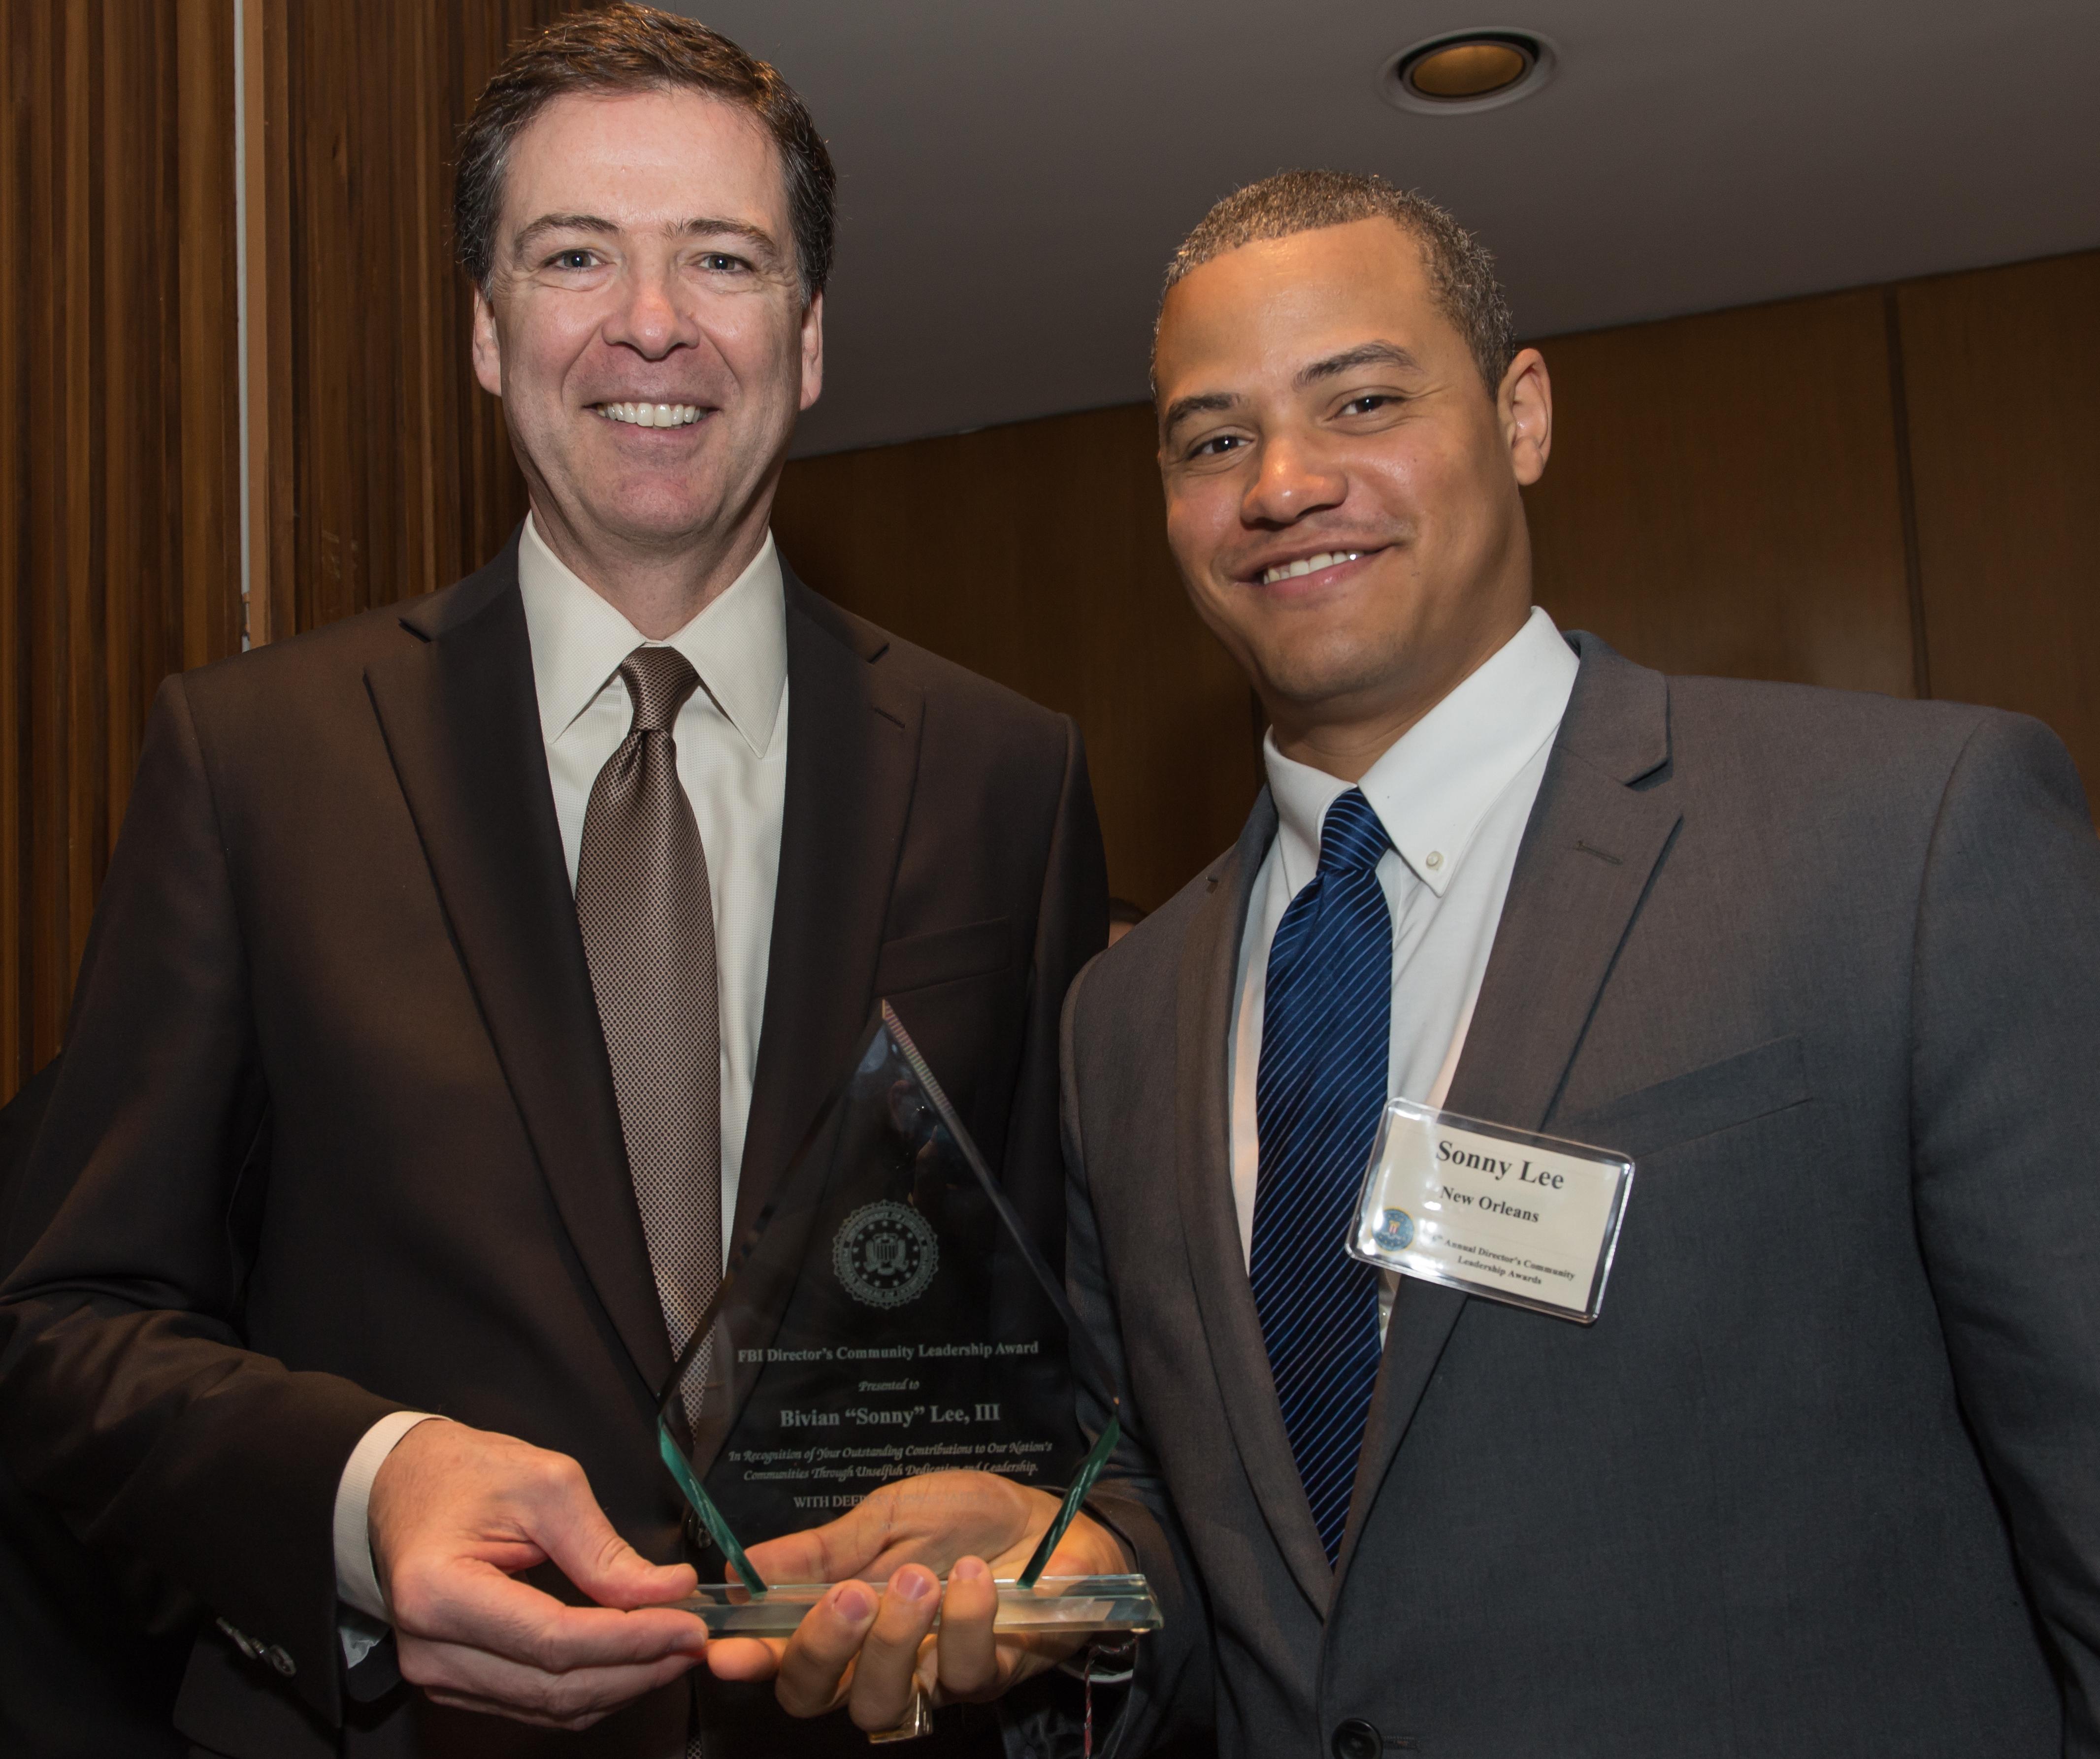 Director Comey with Award Winner Sonny Lee